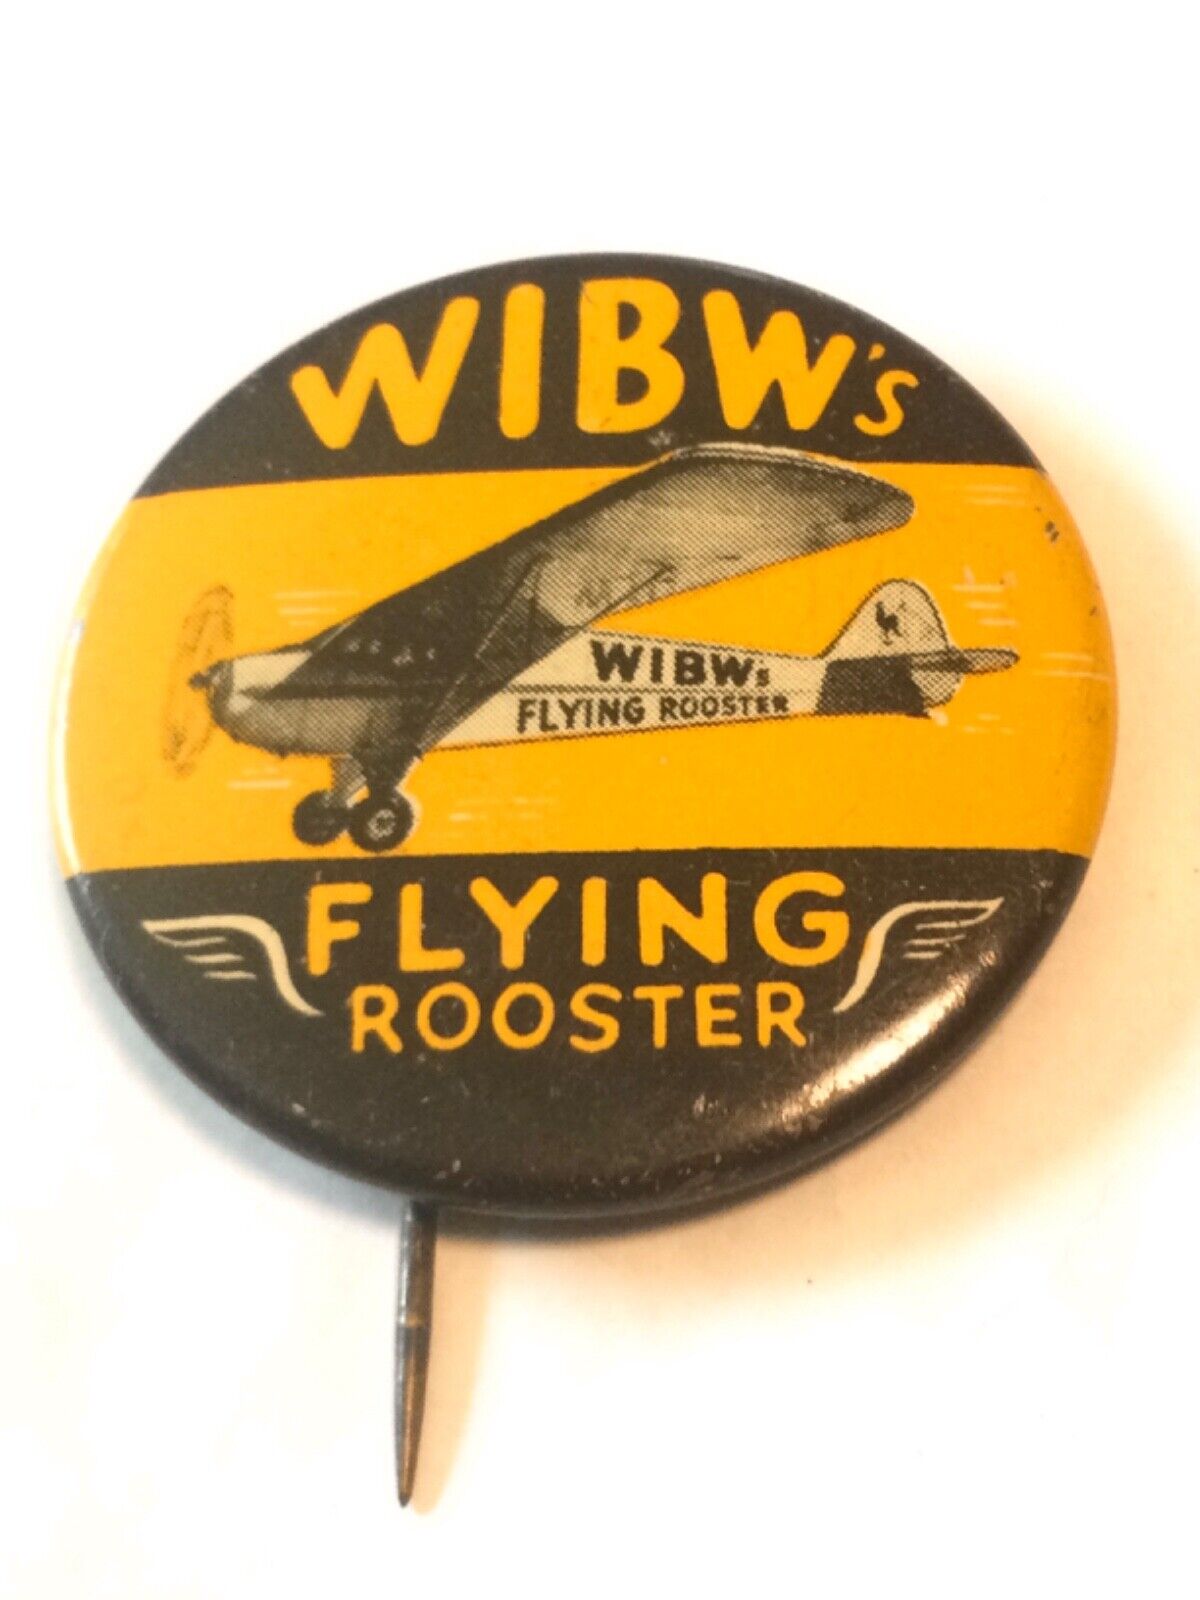 Vintage 1940’s WIBW FLYING ROOSTER AIRPLANE radio television PINBACK BUTTON